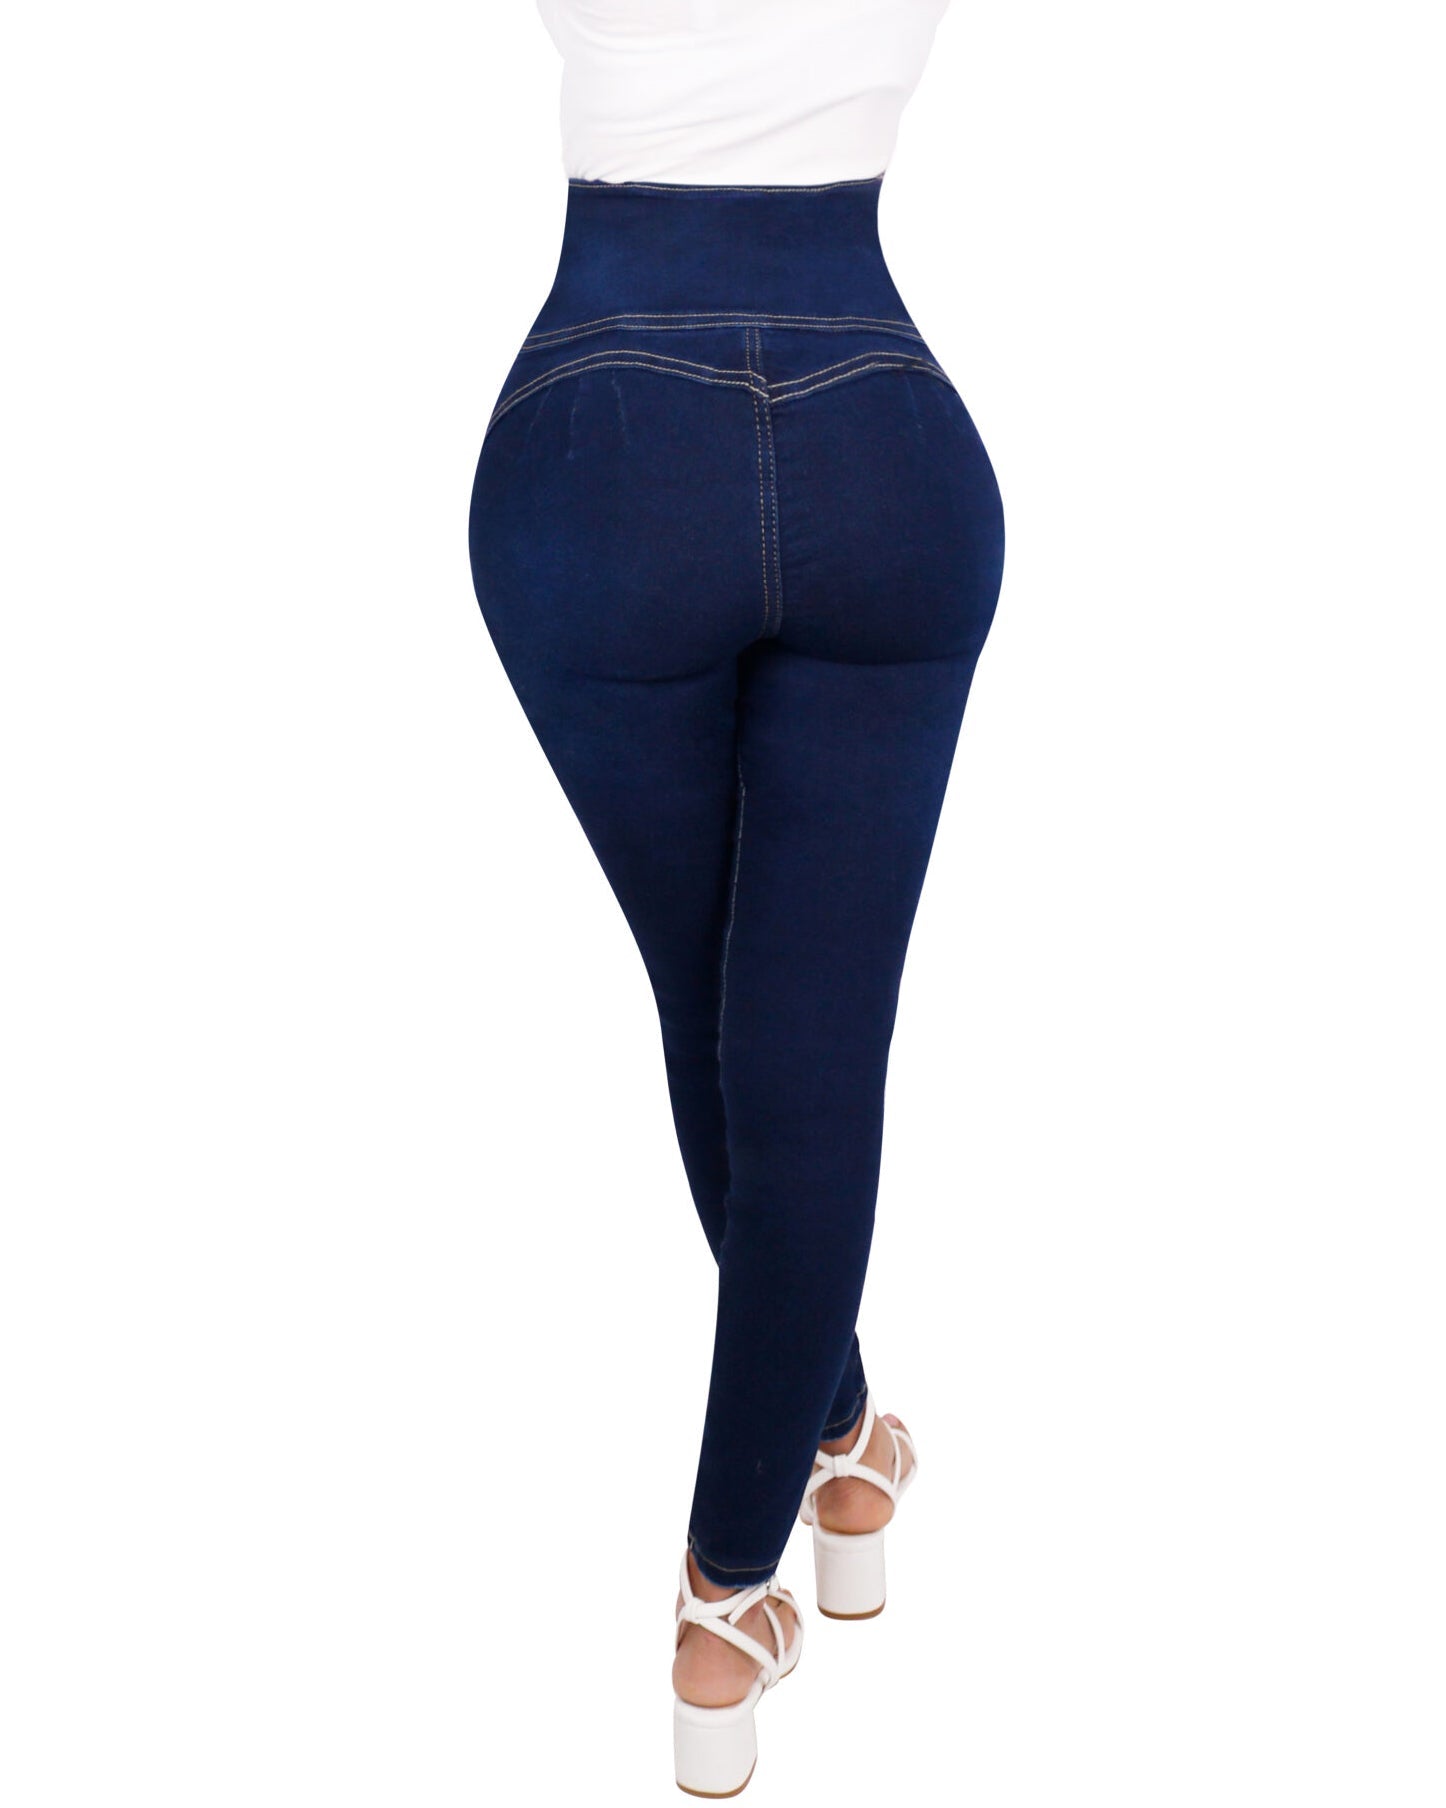 SheCurve® Slimming Jeans With Buttocks, Tummy And Skinny Legs